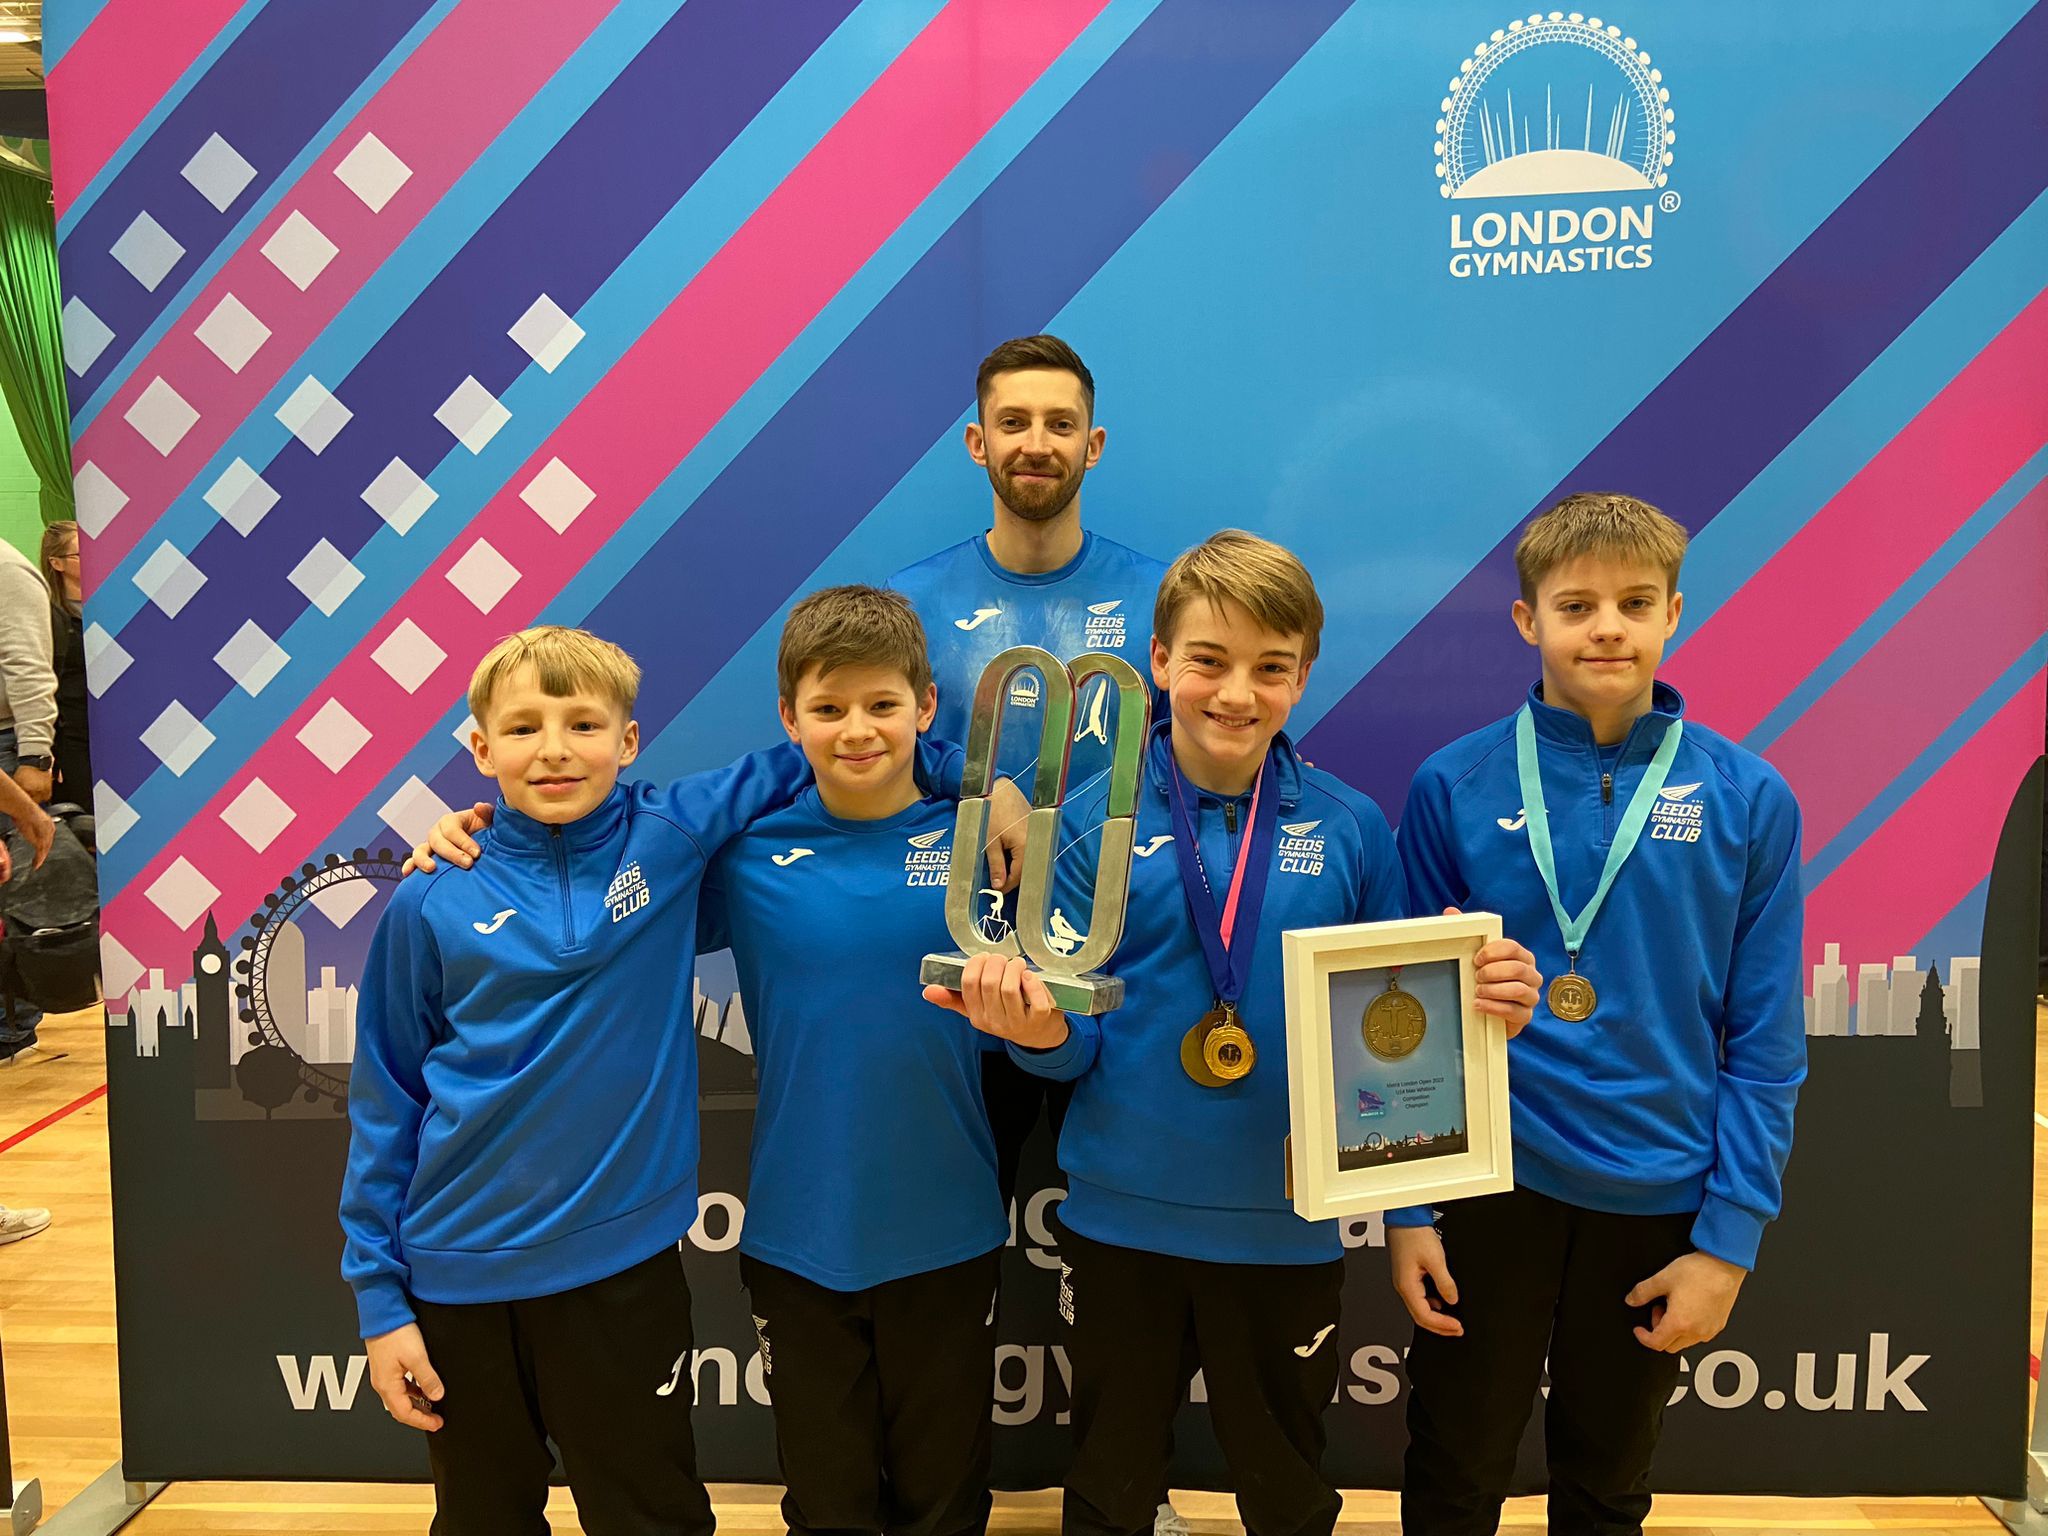 Leeds Gymnasts Seth Ingle & Lucas Scully & Ewan Leask & Archie Doughery at the London Open 2023